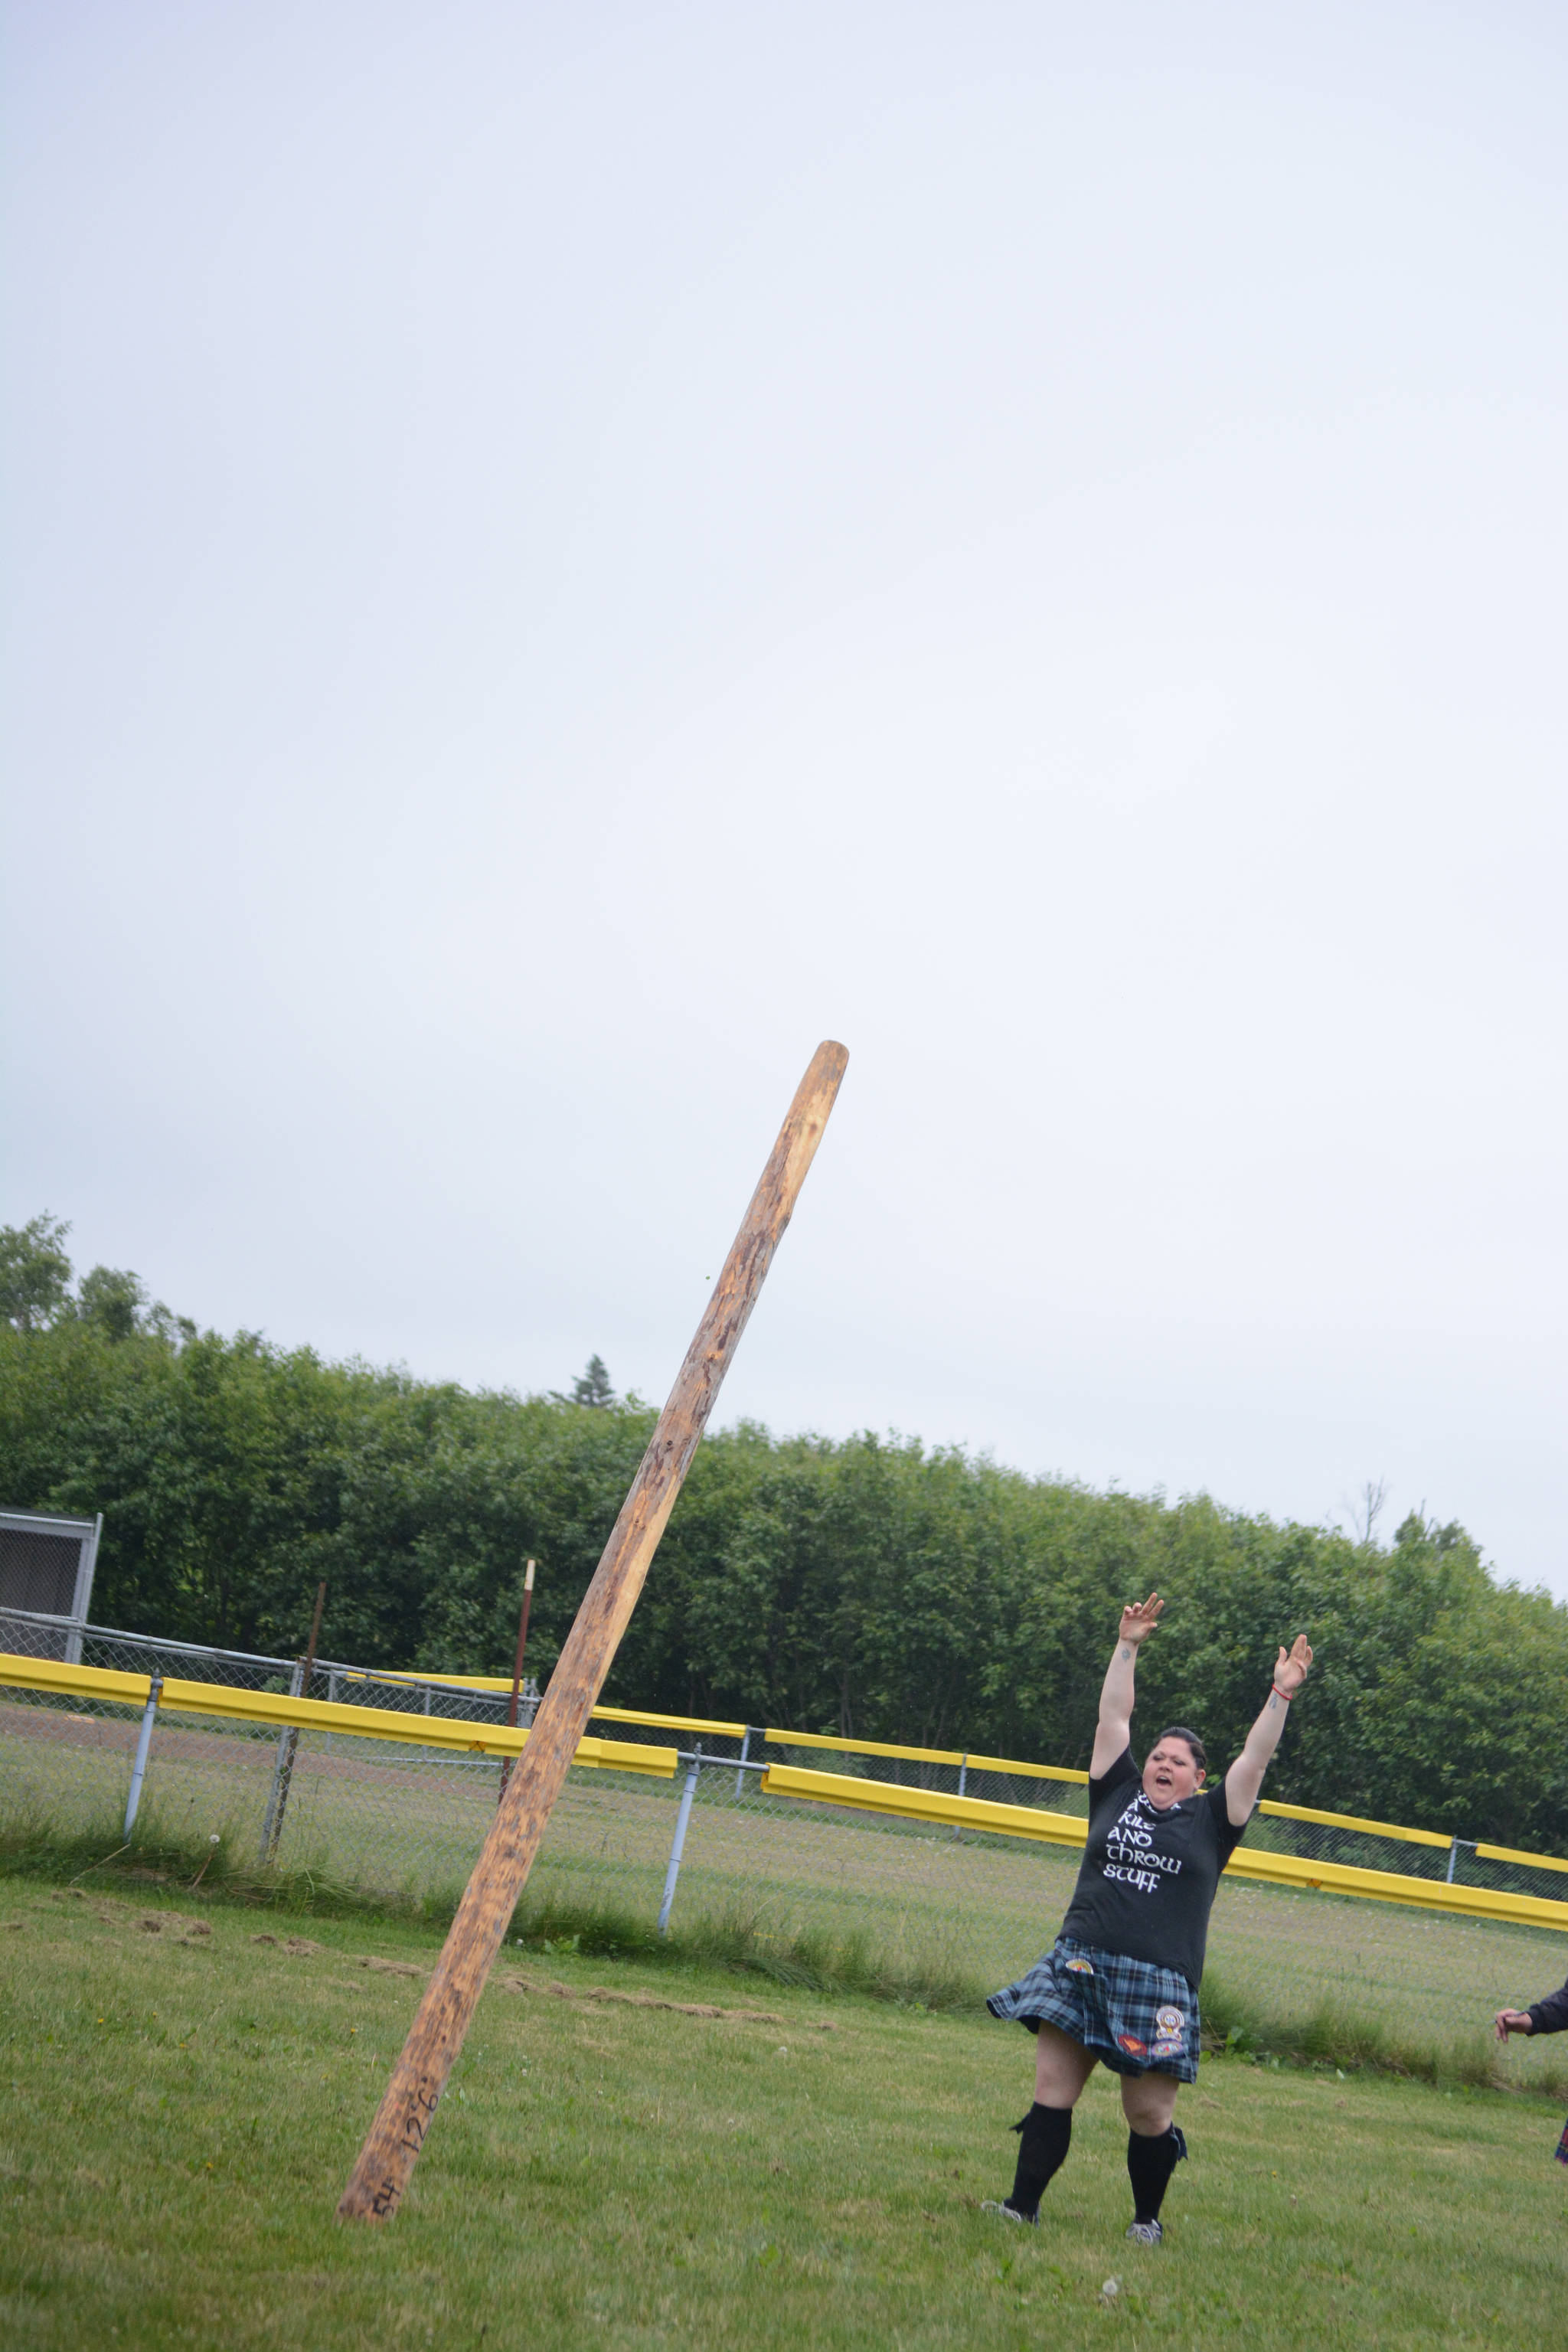 Jeni McDaniel flips the caber at the July 3, 2017 Kachemak Bay Scottish Club Highland Games on Saturday at Karen Hornaday Park. (Photo by Michael Armstrong/Homer News)